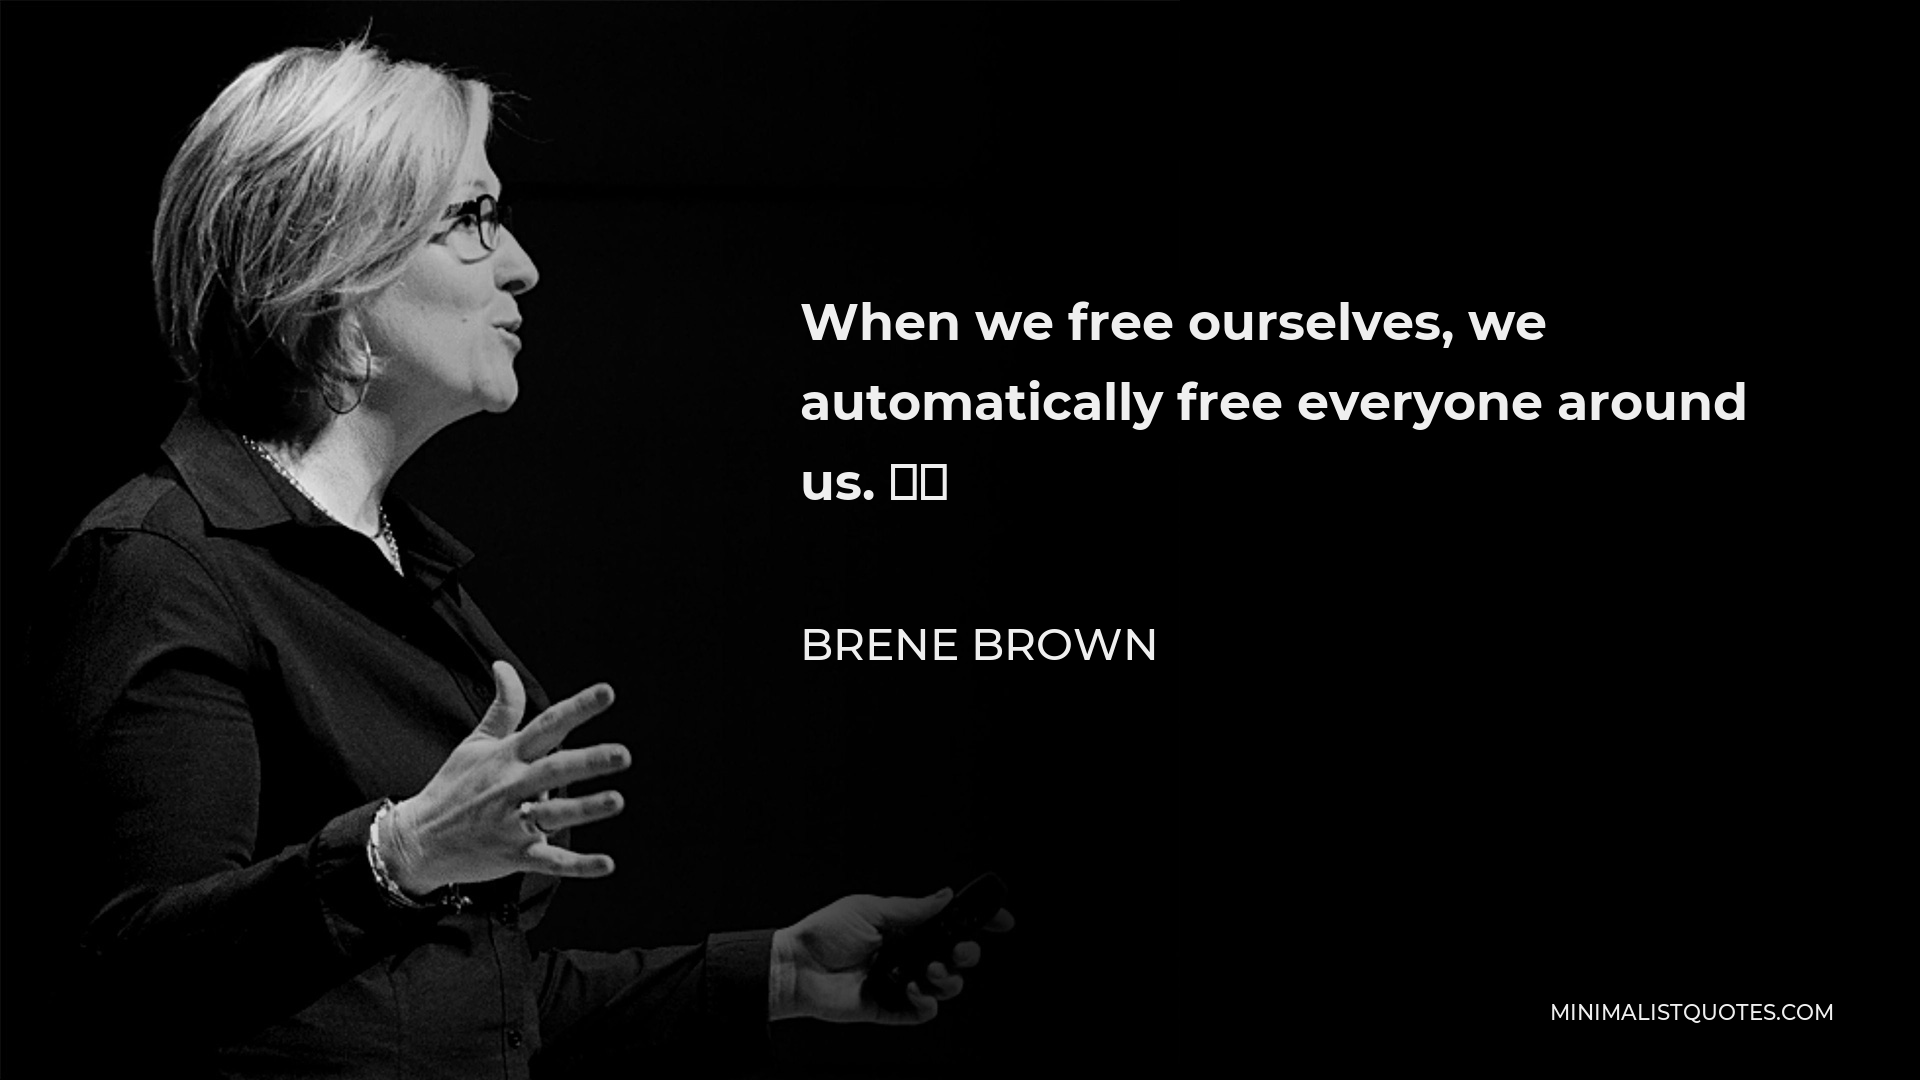 Brene Brown Quote - When we free ourselves, we automatically free everyone around us. ⁣